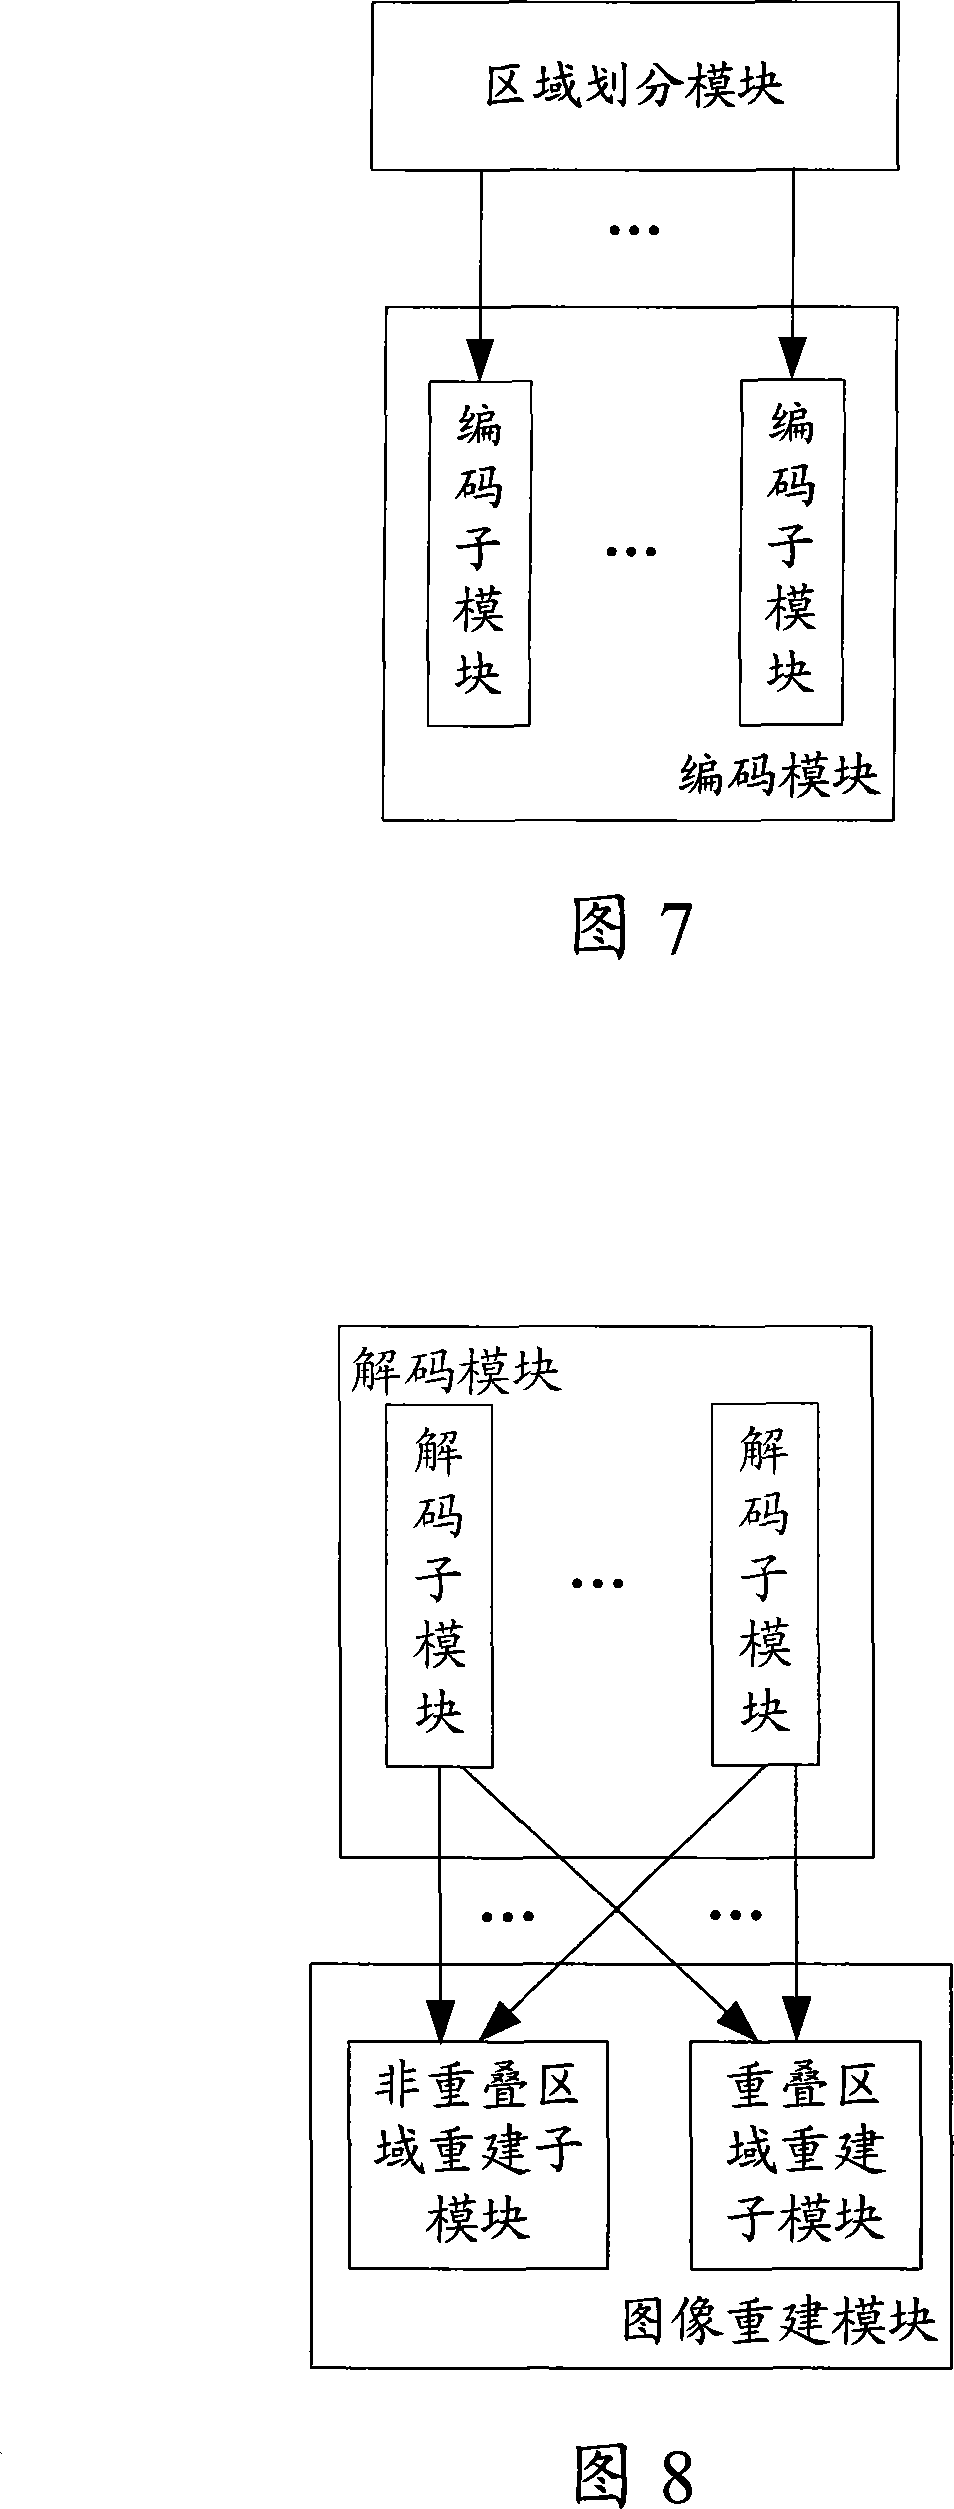 Method and arrangement for encoding and decoding images